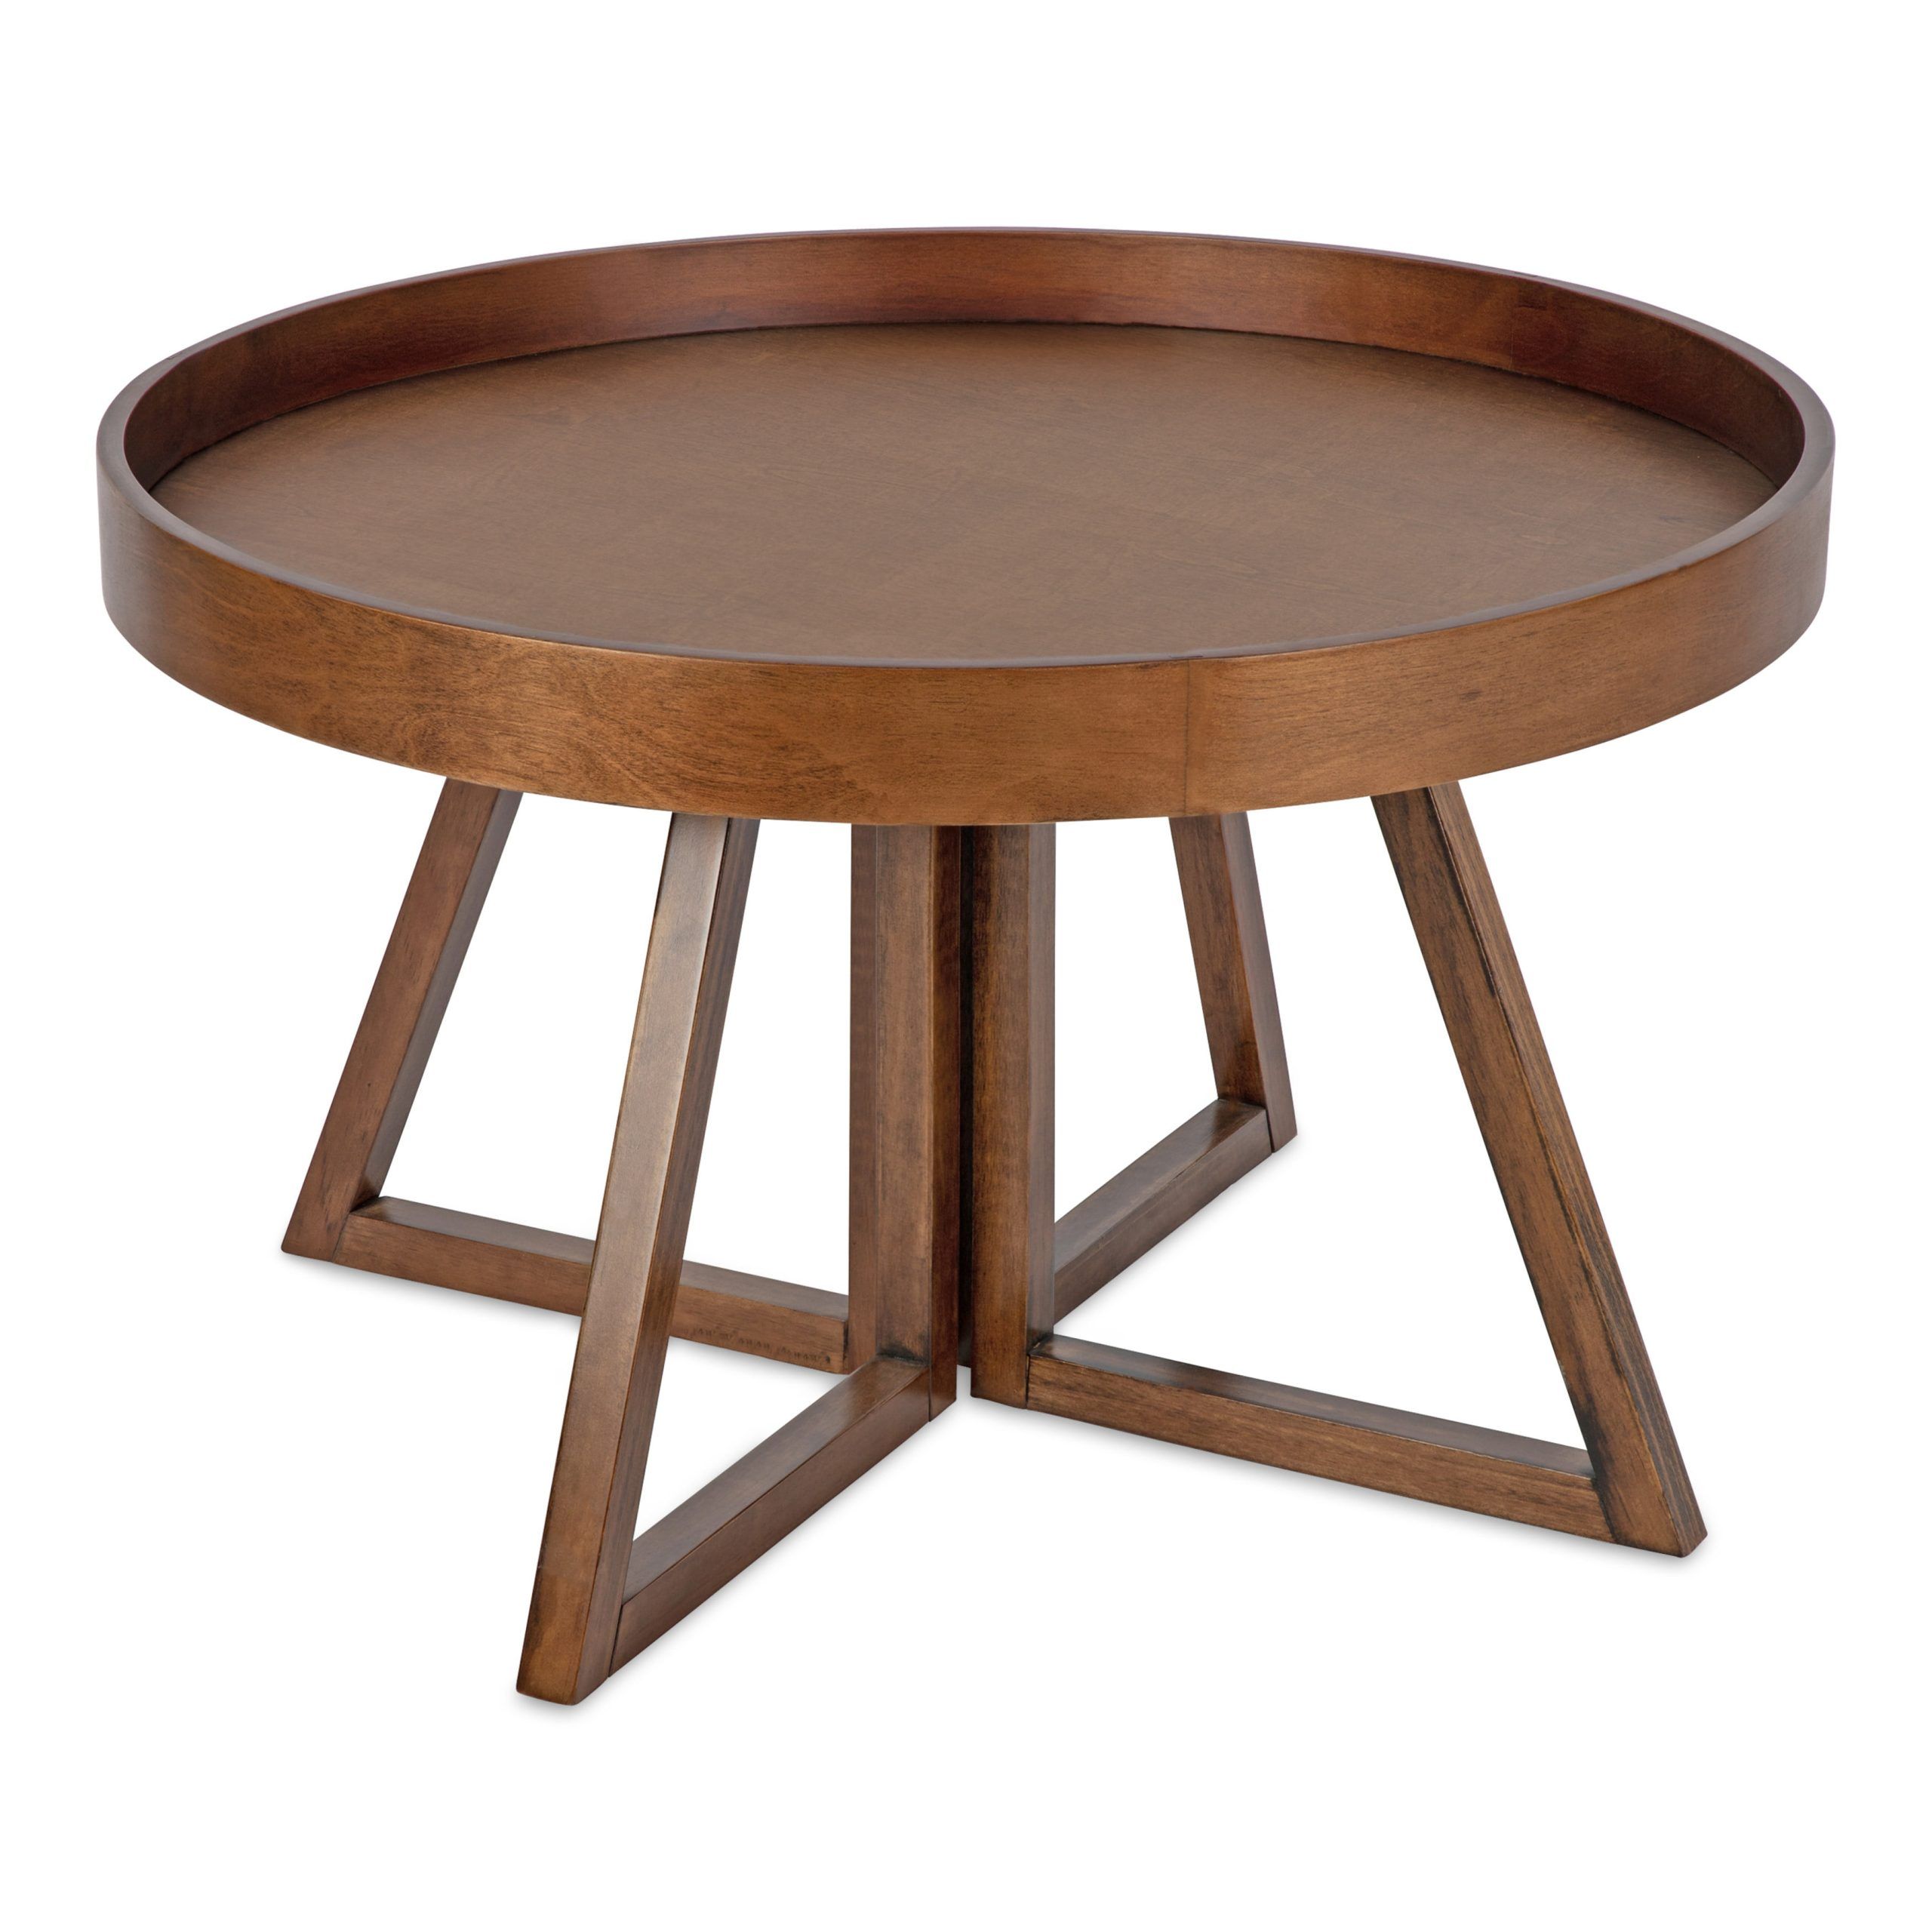 Kate And Laurel Avery Modern Round Coffee Table, 30" X 30" X 18 Intended For Round Coffee Tables (Gallery 2 of 20)